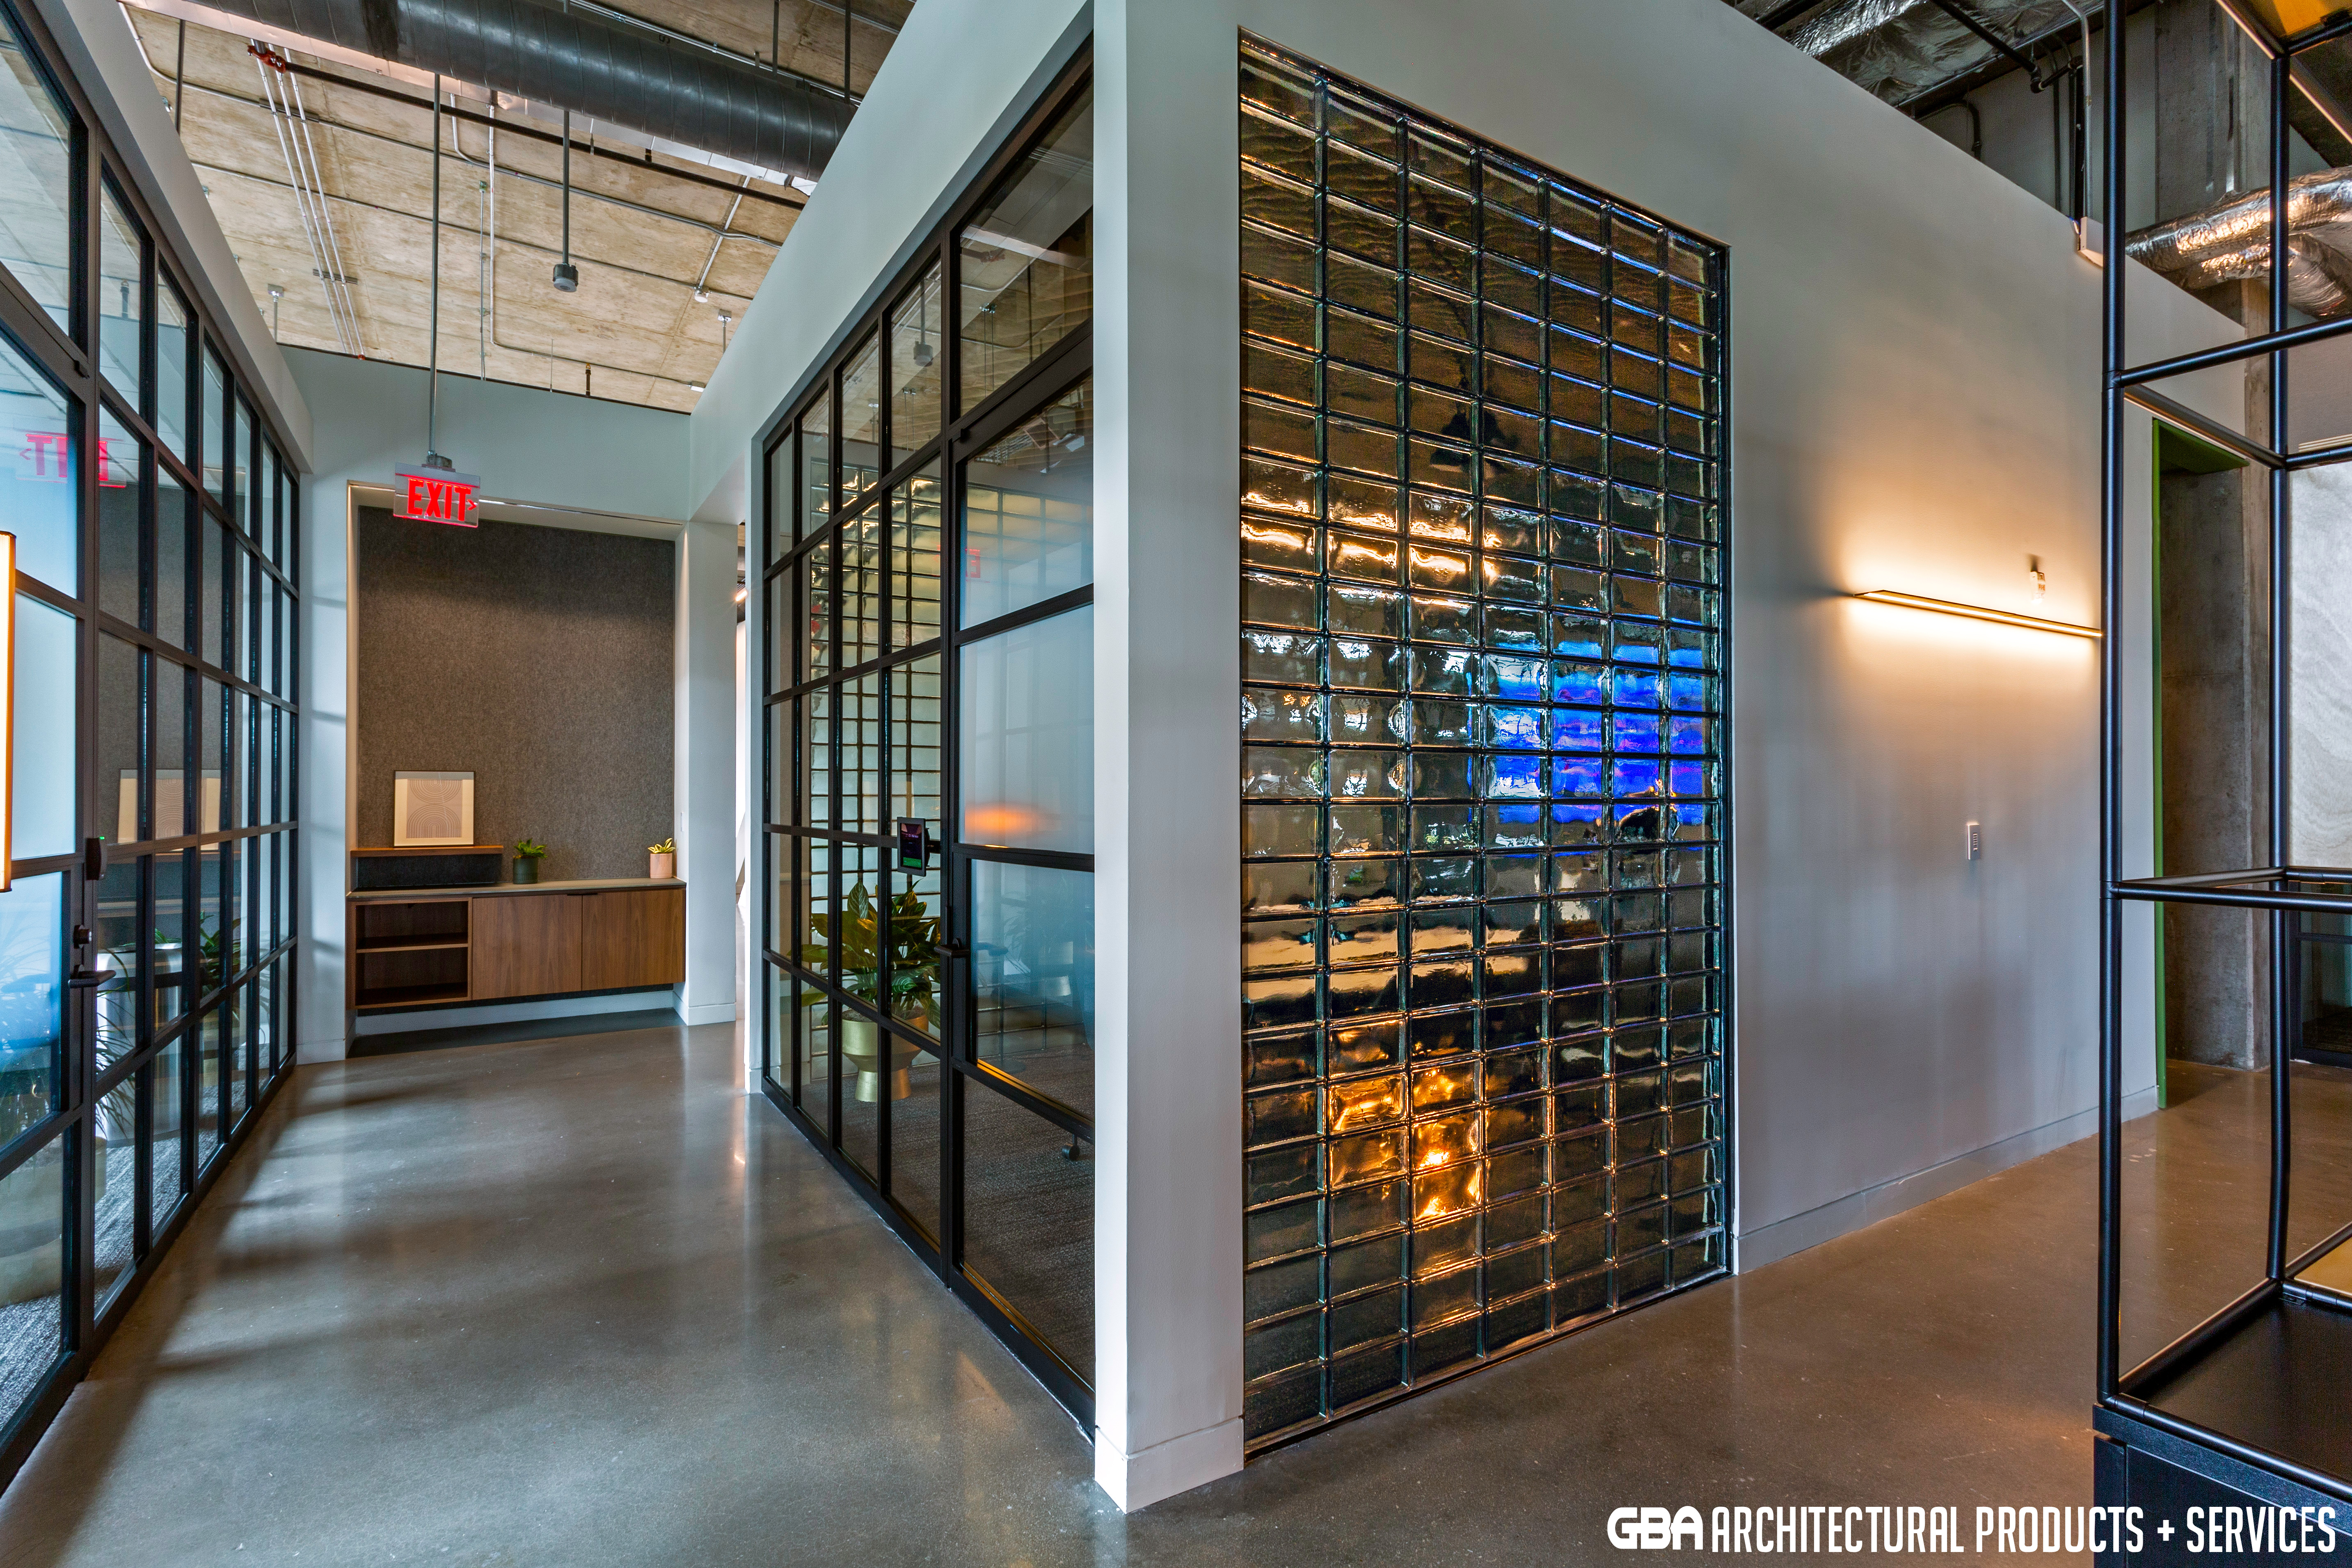 gridded glass wall